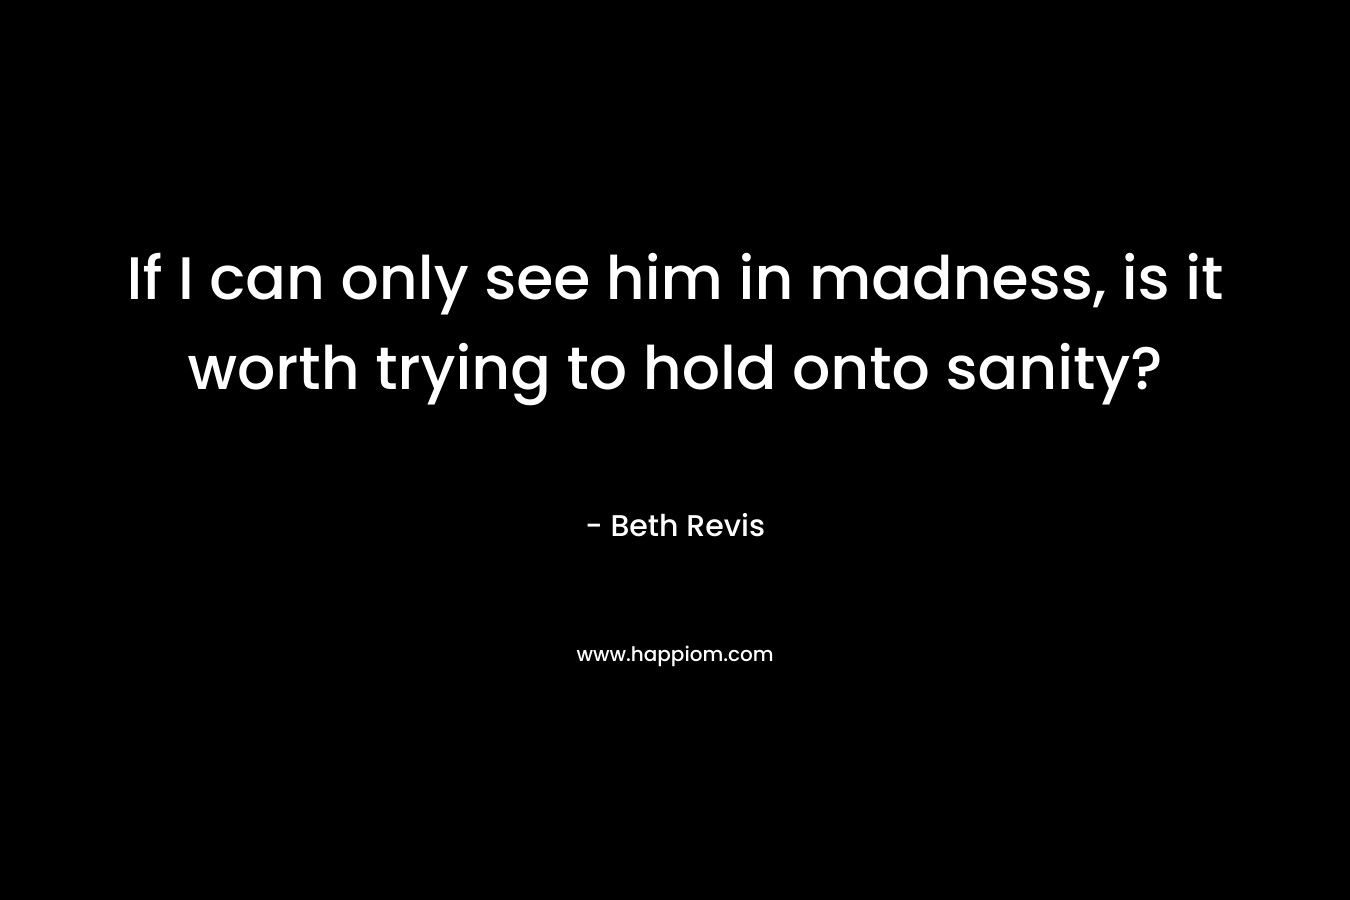 If I can only see him in madness, is it worth trying to hold onto sanity? – Beth Revis